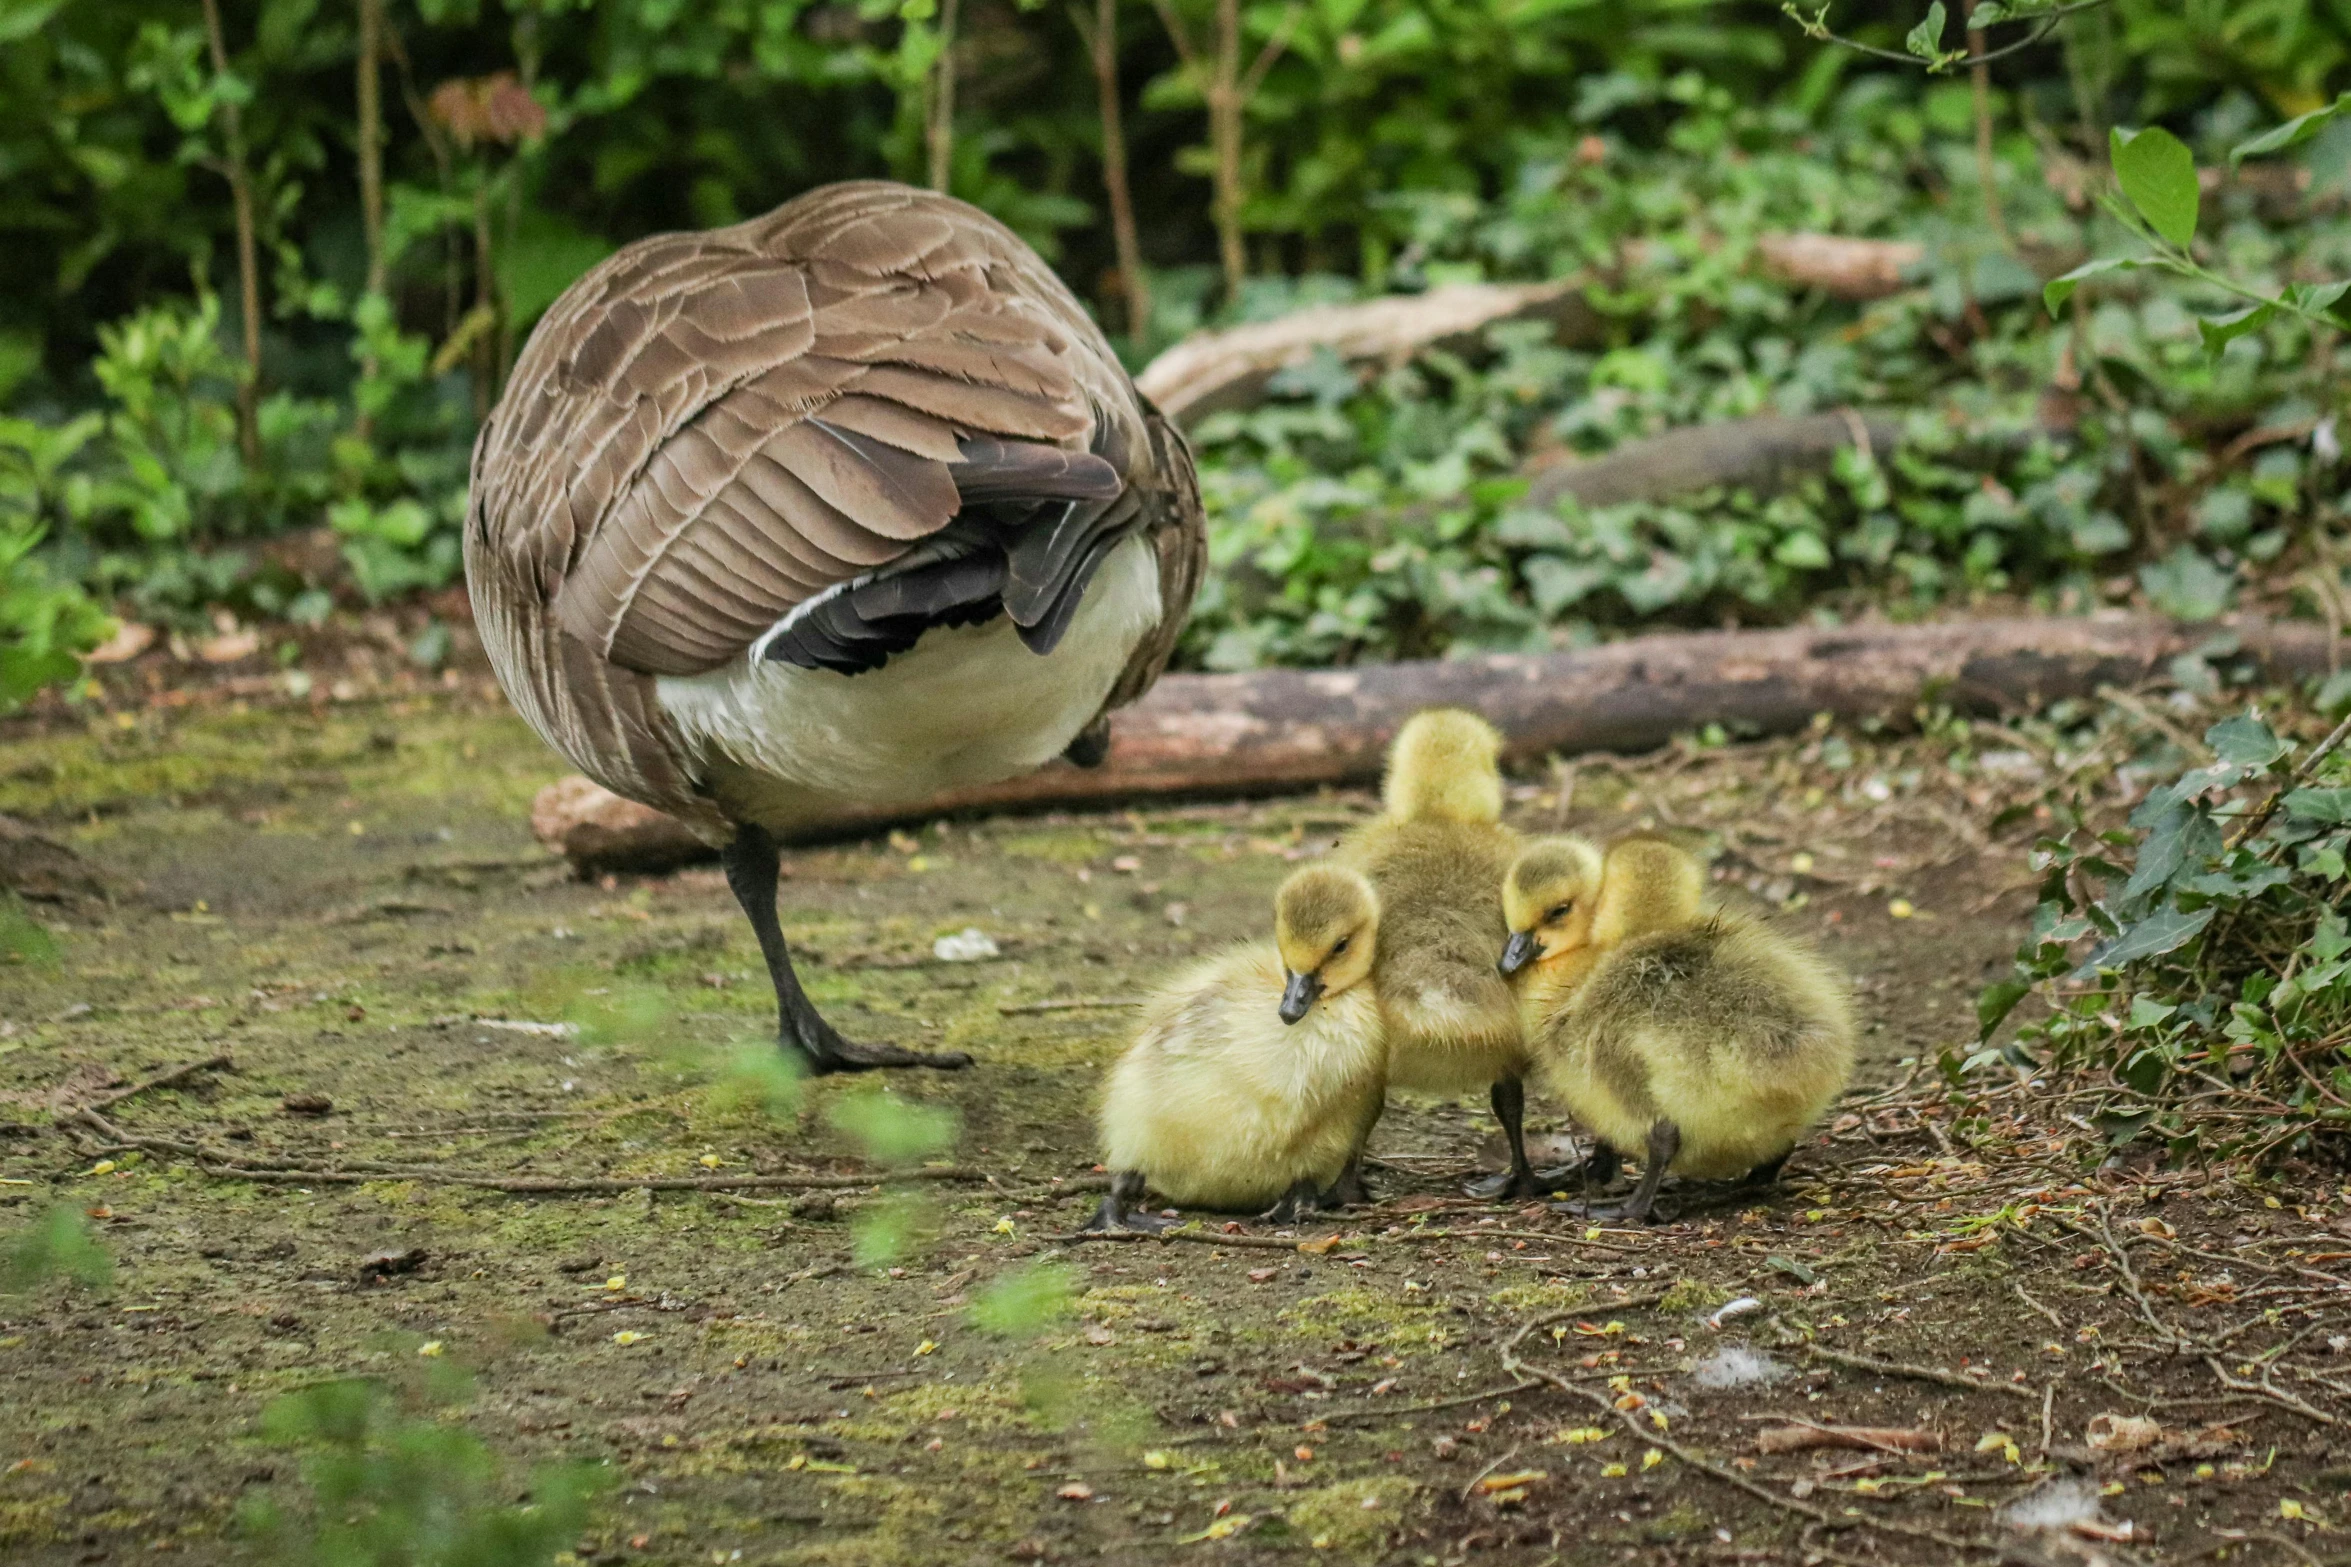 mother goose and young gosling chicks by a fallen tree